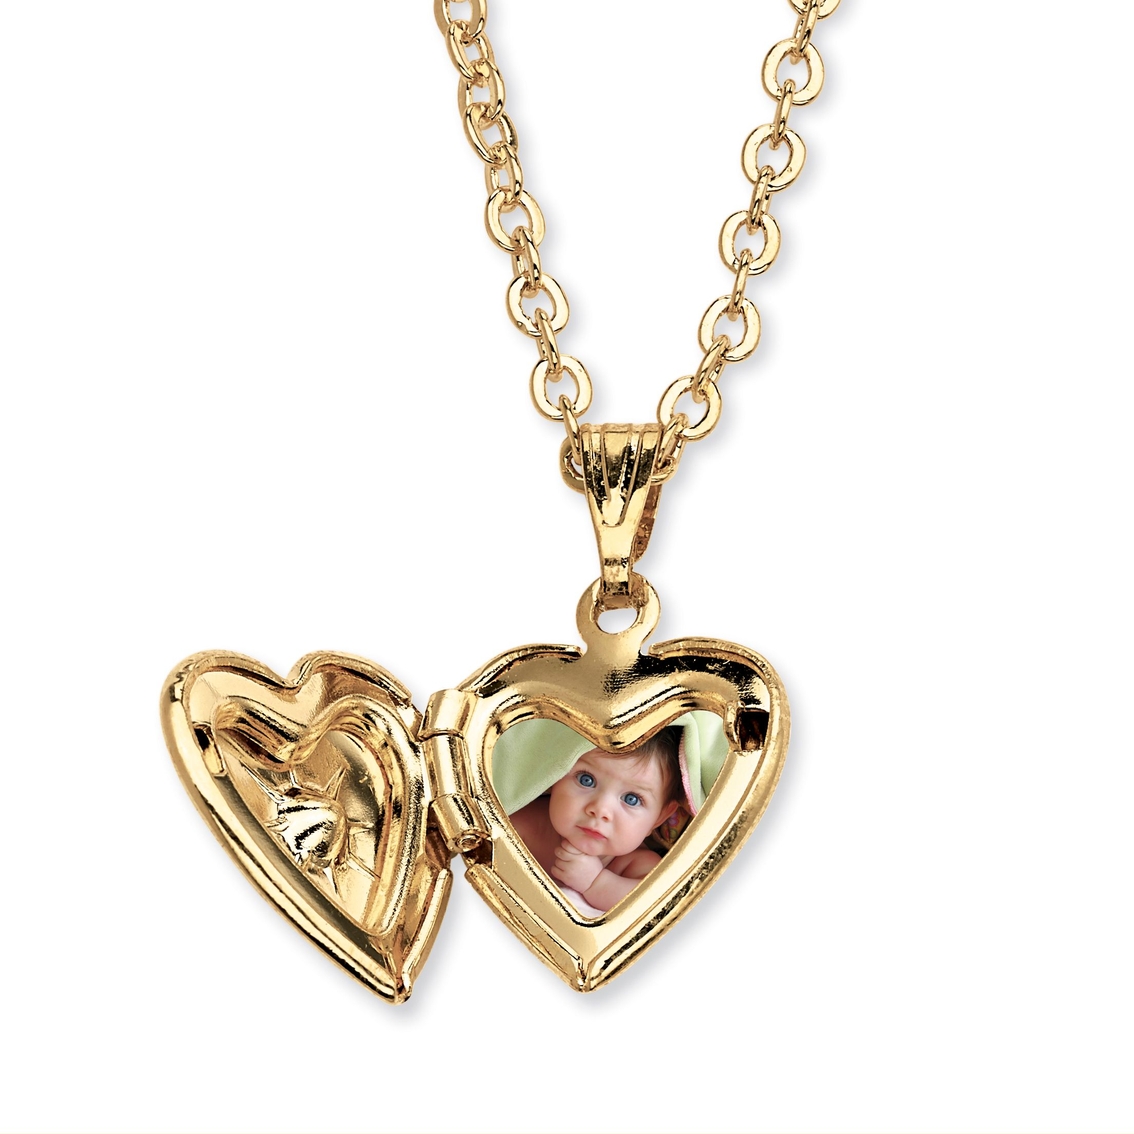 PalmBeach Simulated Birthstone Goldtone Locket with Chain - Image 2 of 4